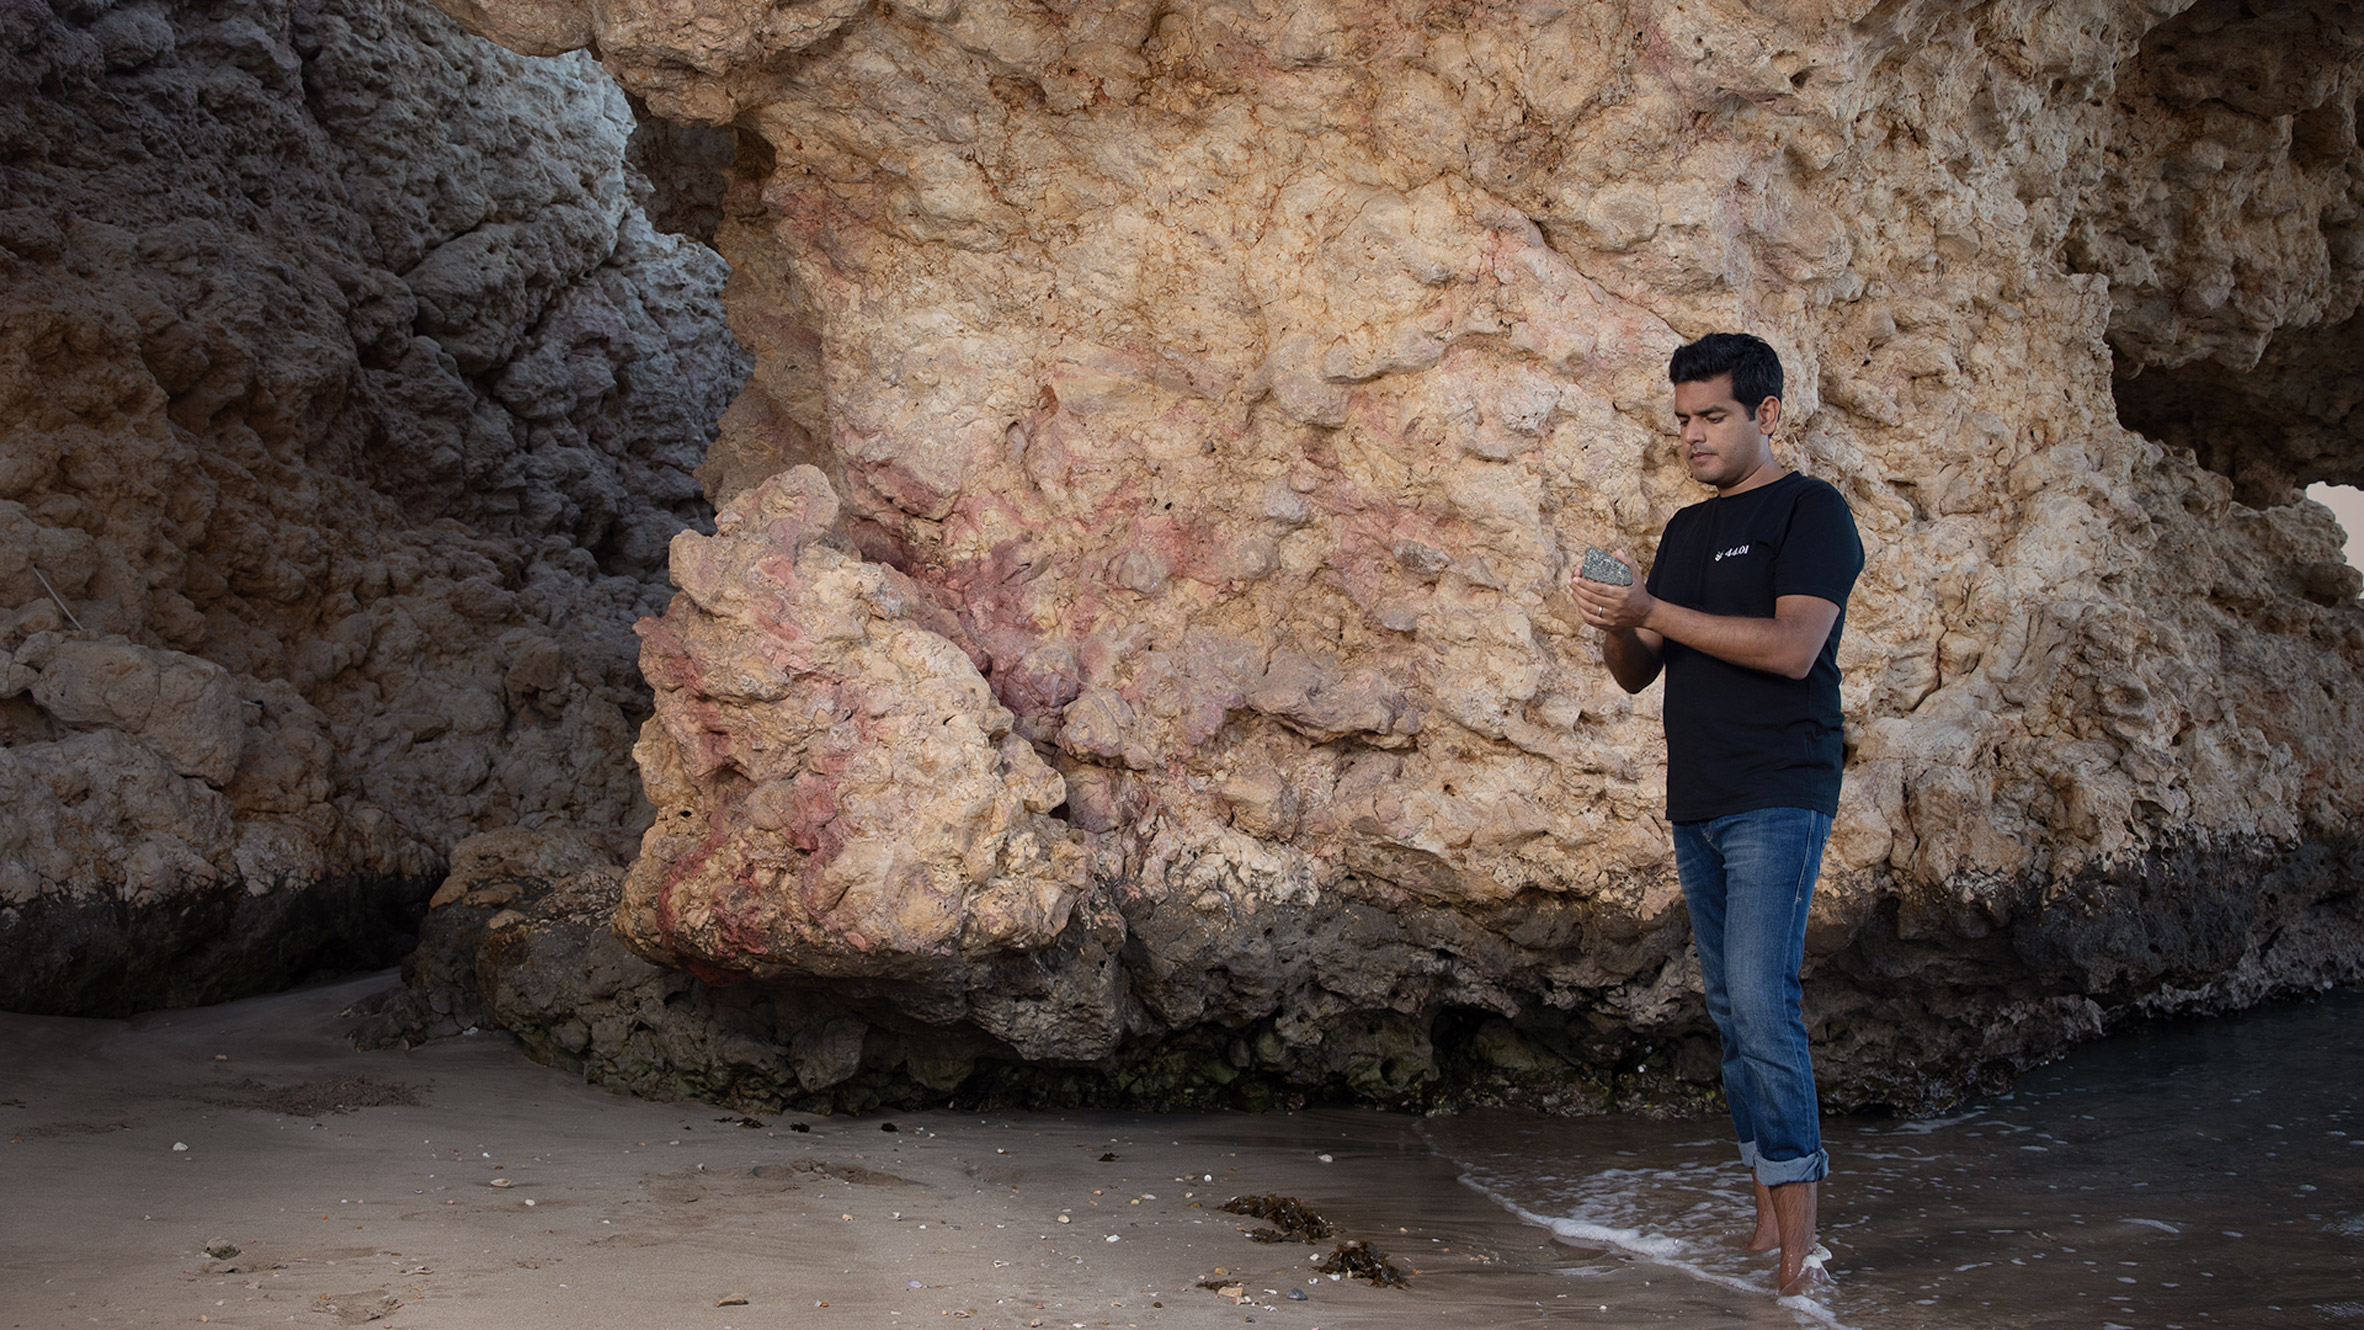 Talal Hasan standing in front of a rock formation